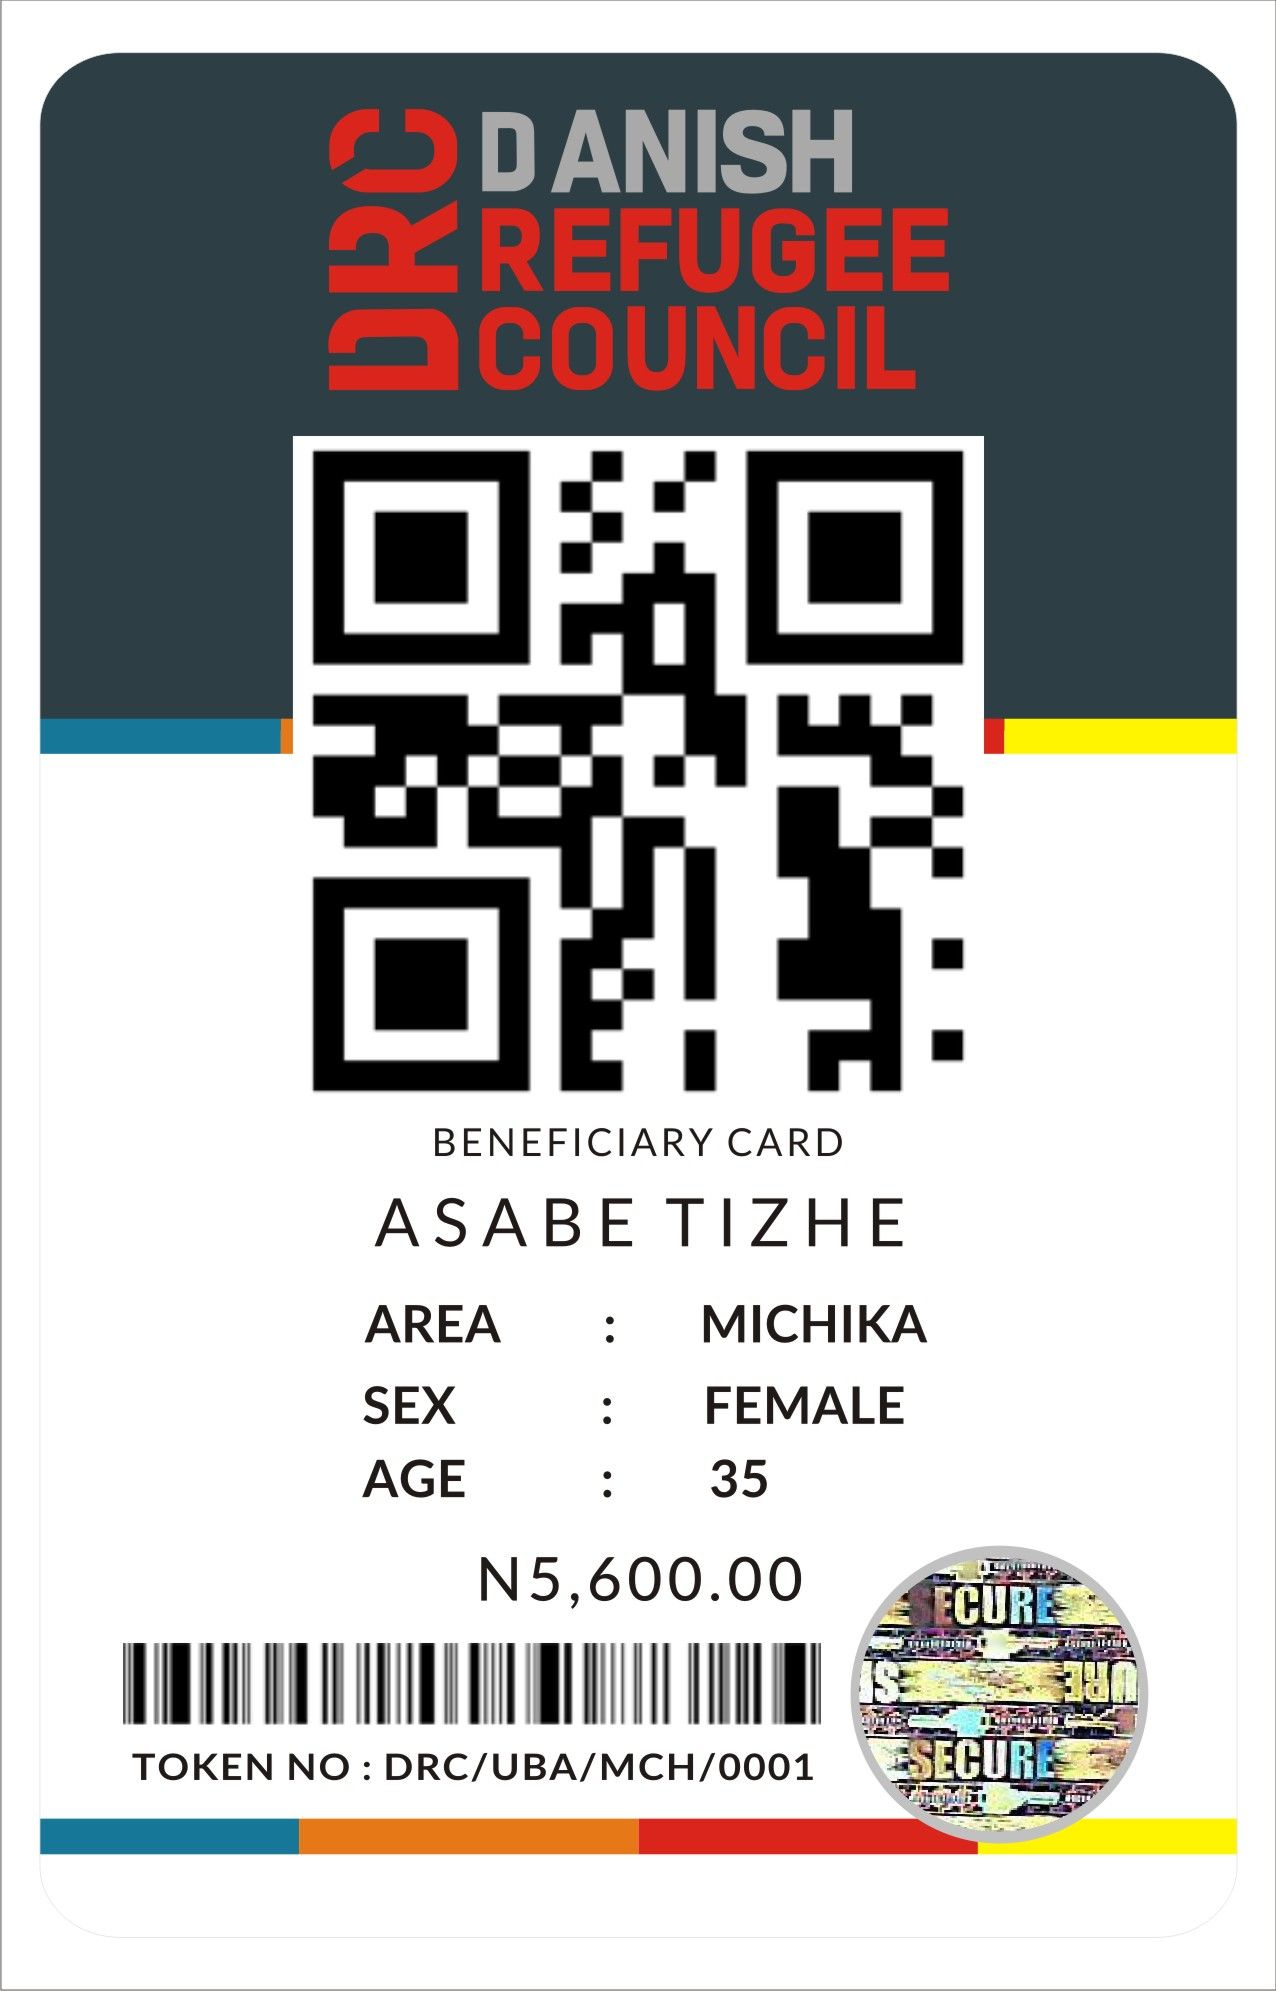 CALL CHINEDU ON 09022536974 TO PRINT QR CODES, BAR CODES, UV INK ETC ON YOUR PRODUCTS